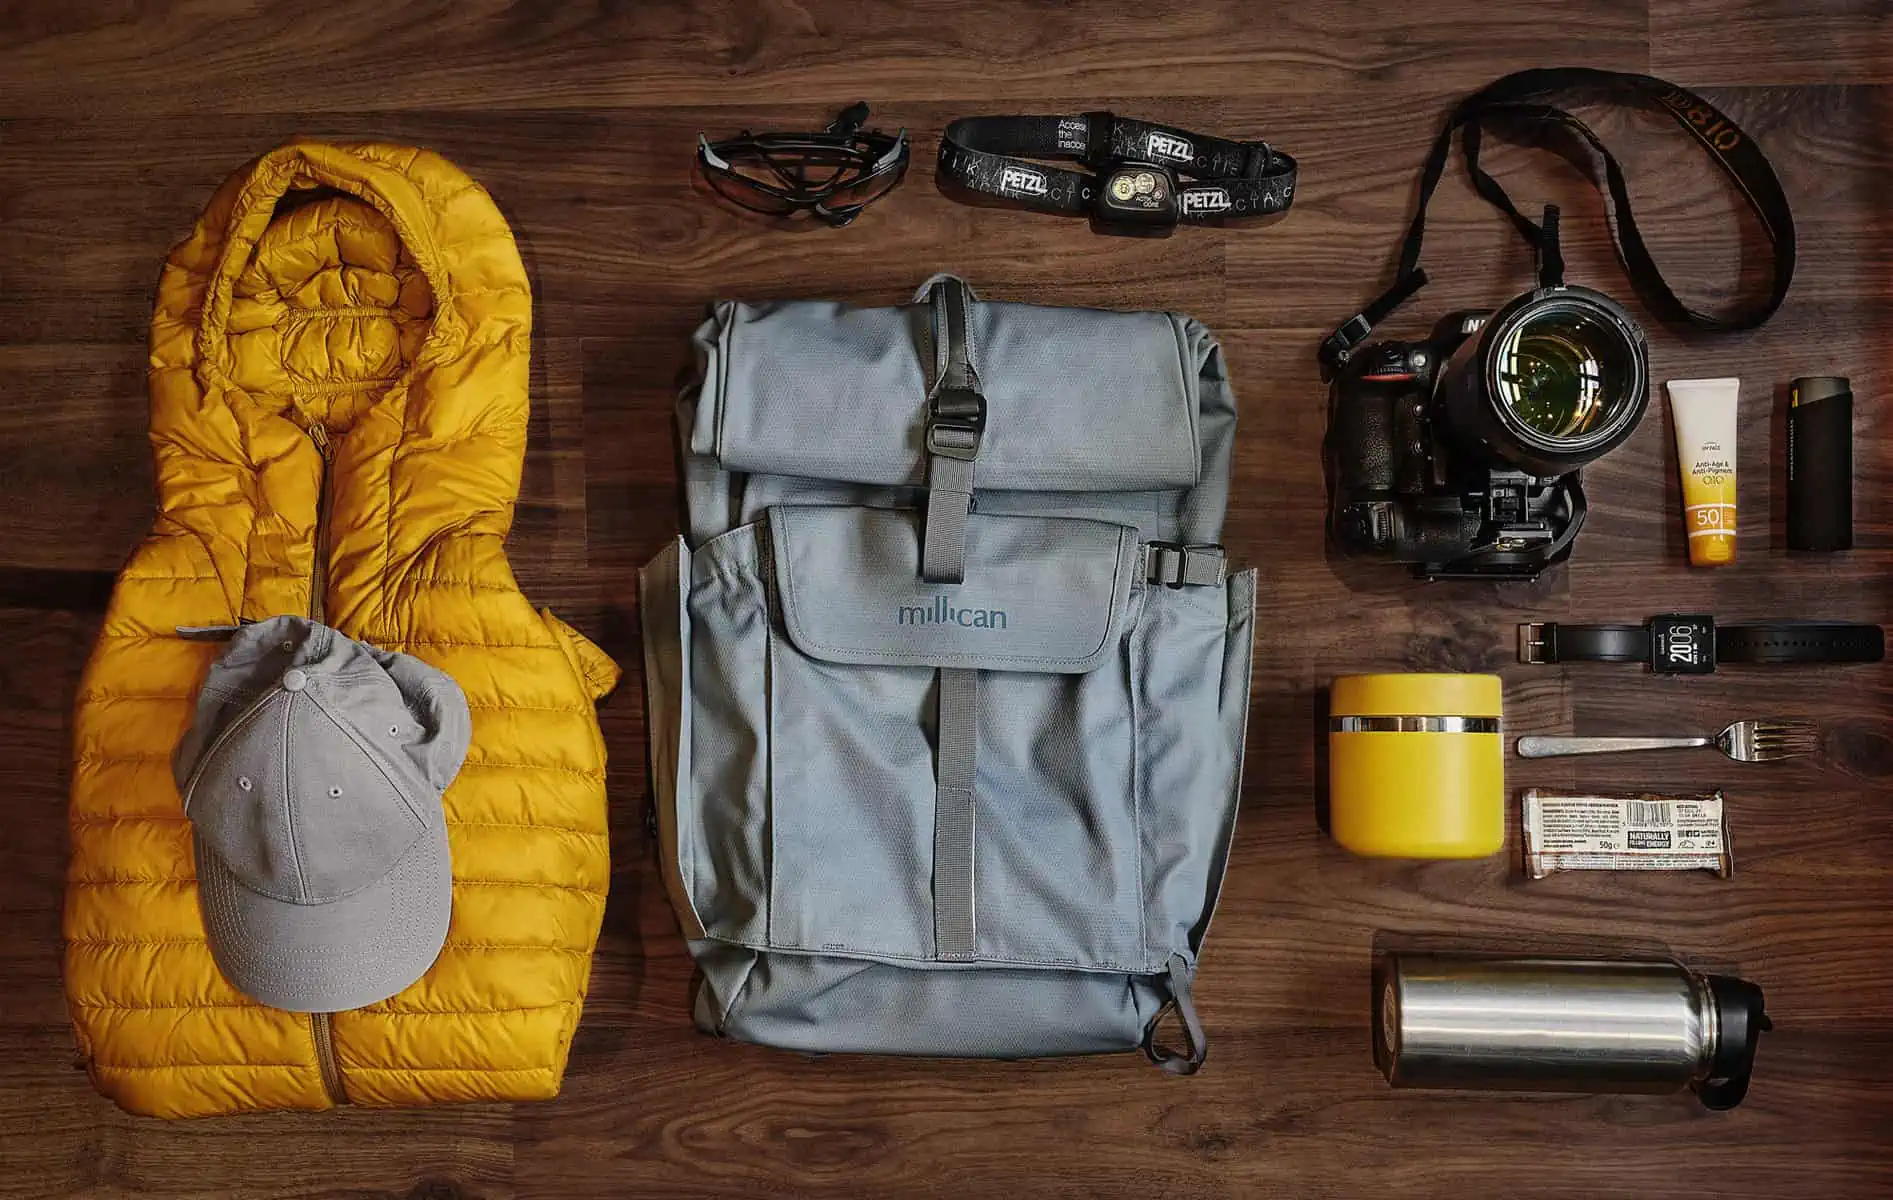 Image description: A landscape image. A flat lay on a dark wood floor shows the items kept in a day pack for exploring. A Millican ‘The Mavericks’ Smith the Roll 15l pack in Tarn sits in the centre. To the left is a bright yellow puffy jacket with grey baseball cap on top. Above the pack is a pair of black sunglasses and a black head torch. To the right is a camera, a tube of yellow sun cream and a battery charger. Below, a yellow food jar, a black smart watch, a silver form, an energy bar and at the bottom a titanium water bottle.&nbsp;